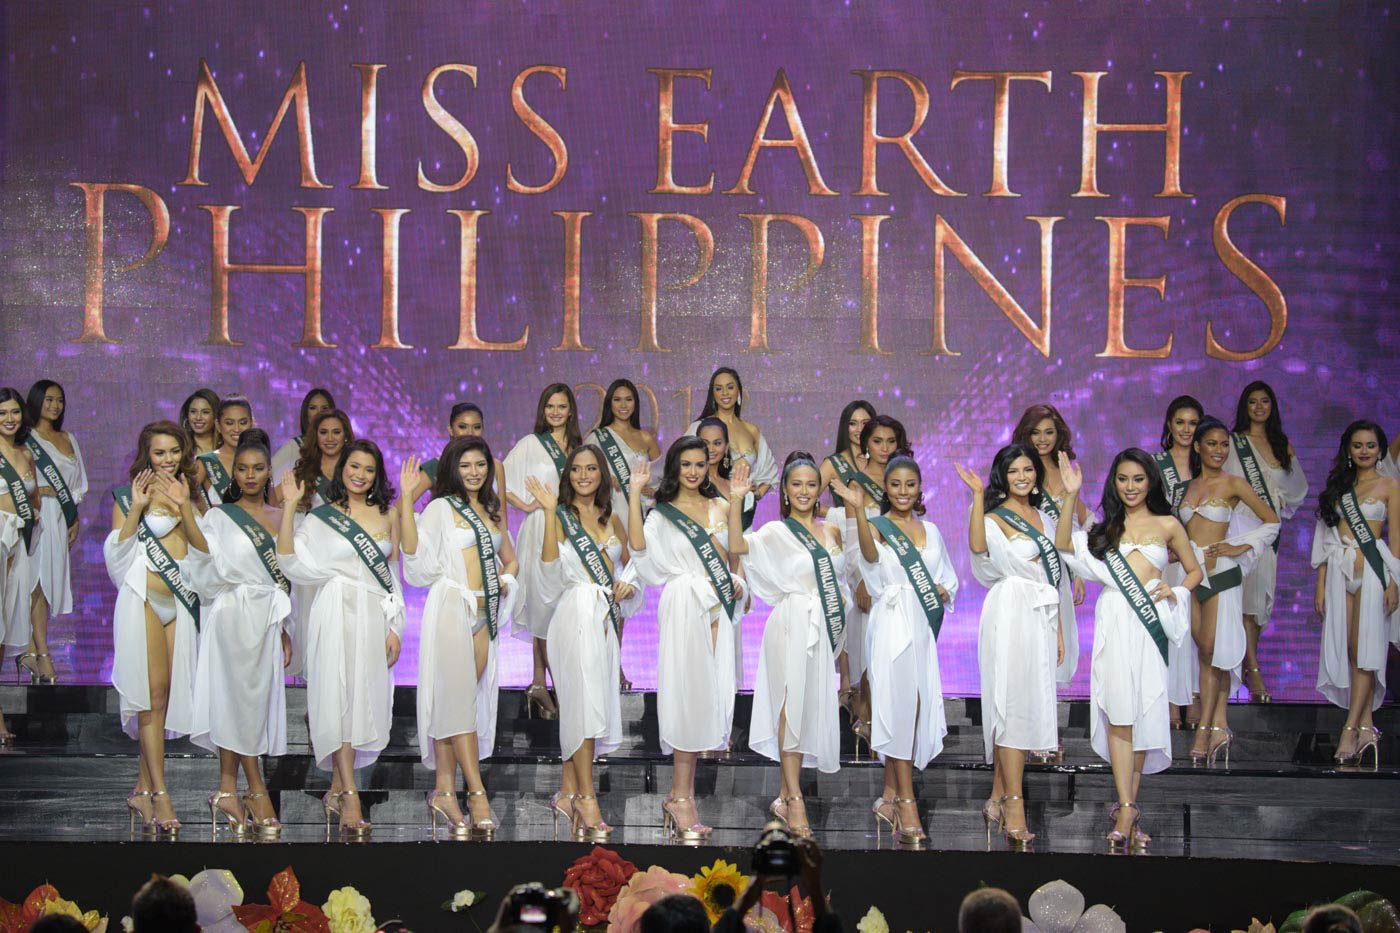 IN PHOTOS: Miss Earth Philippines 2018, swimsuit segment